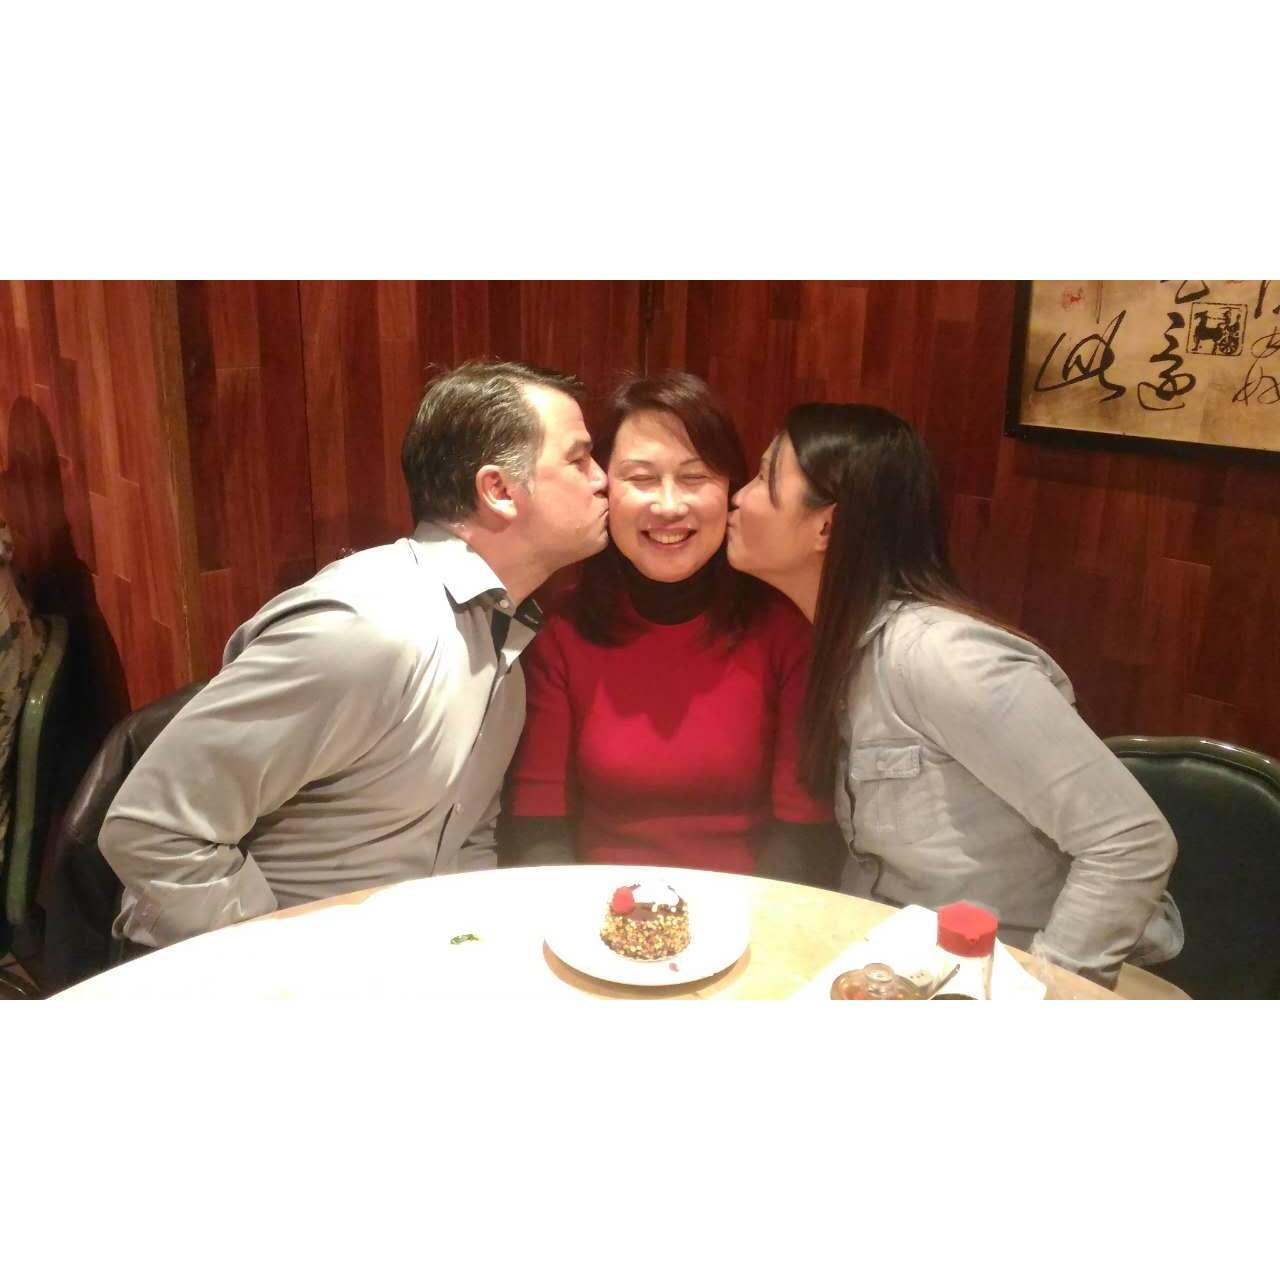 Kevin gave Gui (Vicky’s mom) first kiss at her birthday dinner. He has the ability to give the parents and Vicky the biggest smile.